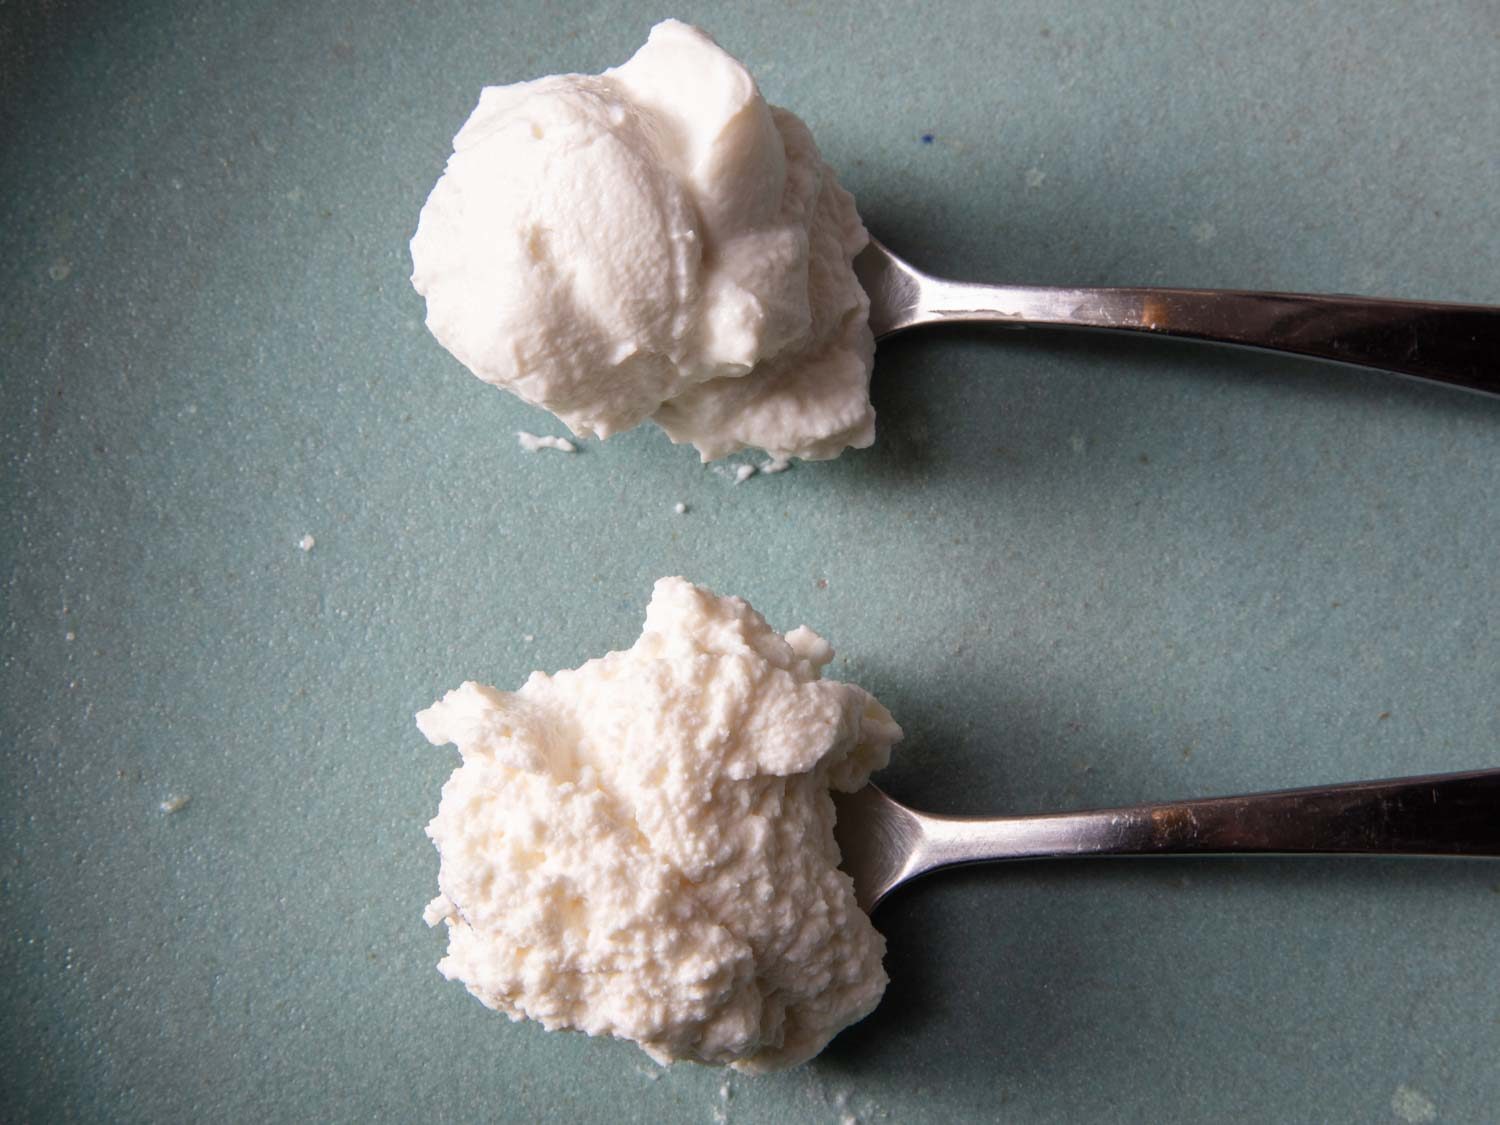 side by side comparison of two ricotta styles, one grainy and coarse, the other creamy and smooth